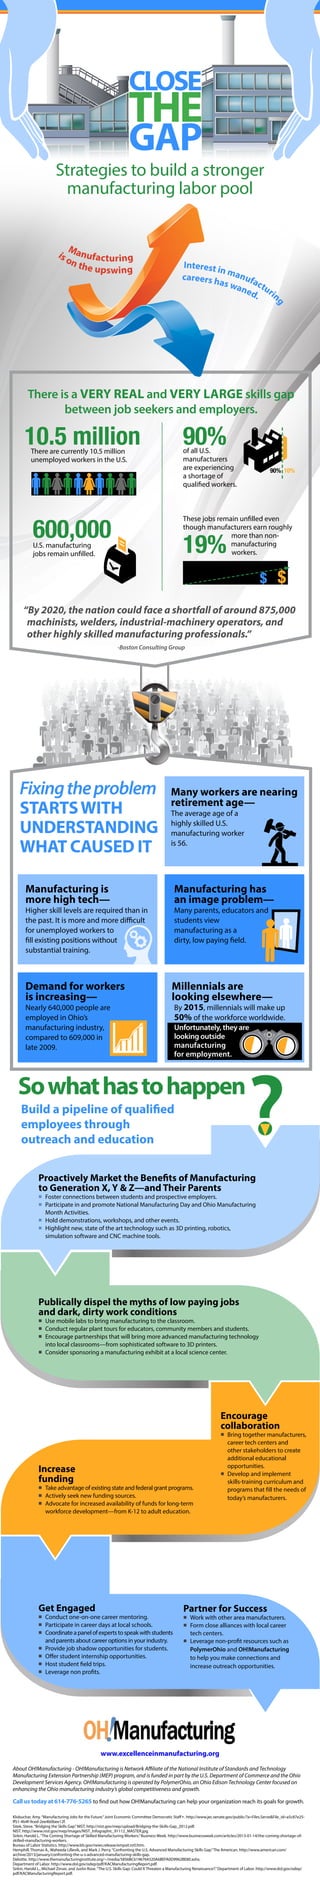 Millennials are
looking elsewhere—
By 2015, millennials will make up
50% of the workforce worldwide.
Unfortunately, they are
looking outside
manufacturing
for employment.
Demand for workers
is increasing—
Nearly 640,000 people are
employed in Ohio’s
manufacturing industry,
compared to 609,000 in
late 2009.
About OH!Manufacturing - OH!Manufacturing is Network Affiliate of the National Institute of Standards and Technology
Manufacturing Extension Partnership (MEP) program, and is funded in part by the U.S. Department of Commerce and the Ohio
Development Services Agency. OH!Manufacturing is operated by PolymerOhio, an Ohio Edison Technology Center focused on
enhancing the Ohio manufacturing industry’s global competitiveness and growth.
Call us today at 614-776-5265 to find out how OH!Manufacturing can help your organization reach its goals for growth.
www.excellenceinmanufacturing.org
Fixingtheproblem
STARTSWITH
UNDERSTANDING
WHAT CAUSED IT
Sowhathastohappen
These jobs remain unfilled even
though manufacturers earn roughly 		
	 more than non-	
manufacturing
		 workers.
There are currently 10.5 million
unemployed workers in the U.S.
90%of all U.S.
manufacturers
are experiencing
a shortage of
qualified workers.
“By 2020, the nation could face a shortfall of around 875,000
machinists, welders, industrial-machinery operators, and
other highly skilled manufacturing professionals.” 			
					-Boston Consulting Group
10.5 million
600,000U.S. manufacturing
jobs remain unfilled.
There is a VERY REAL and VERY LARGE skills gap
between job seekers and employers.
19%
GAP
THE
Many workers are nearing
retirement age—
The average age of a
highly skilled U.S.
manufacturing worker
is 56.
Manufacturing has
an image problem—
Many parents, educators and
students view
manufacturing as a
dirty, low paying field.
Manufacturing is
more high tech—
Higher skill levels are required than in
the past. It is more and more difficult
for unemployed workers to
fill existing positions without
substantial training.
Strategies to build a stronger
manufacturing labor pool
90% 10%
CLOSE
Get Engaged
n	Conduct one-on-one career mentoring.
n	Participate in career days at local schools.
n	Coordinate a panel of experts to speak with students
	 and parents about career options in your industry.
n	Provide job shadow opportunities for students.
n	Offer student internship opportunities.
n	Host student field trips.
n	Leverage non profits.
Proactively Market the Benefits of Manufacturing
to Generation X, Y & Z—and Their Parents
n	Foster connections between students and prospective employers.
n	Participate in and promote National Manufacturing Day and Ohio Manufacturing
Month Activities.
n	Hold demonstrations, workshops, and other events.
n	Highlight new, state of the art technology such as 3D printing, robotics,
simulation software and CNC machine tools.
Encourage
collaboration
n	Bring together manufacturers,
career tech centers and
other stakeholders to create
additional educational
opportunities.
n	Develop and implement
skills-training curriculum and
programs that fill the needs of
today’s manufacturers.
Increase
funding
n	Take advantage of existing state and federal grant programs.
n	Actively seek new funding sources.
n	Advocate for increased availability of funds for long-term
workforce development—from K-12 to adult education.
Partner for Success
n	Work with other area manufacturers.
n	Form close alliances with local career
tech centers.
n	Leverage non-profit resources such as
PolymerOhio and OH!Manufacturing
to help you make connections and
increase outreach opportunities.
Publically dispel the myths of low paying jobs
and dark, dirty work conditions
n	Use mobile labs to bring manufacturing to the classroom.
n	Conduct regular plant tours for educators, community members and students.
n	Encourage partnerships that will bring more advanced manufacturing technology
into local classrooms—from sophisticated software to 3D printers.
n	Consider sponsoring a manufacturing exhibit at a local science center.
Build a pipeline of qualified
employees through
outreach and education
Interest in manufacturin
gcareers has waned.
Manufacturingis on the upswing
Klobuchar, Amy.“Manufacturing Jobs for the Future.”Joint Economic Committee Democratic Staff ▪. http://www.jec.senate.gov/public/?a=Files.Serve&File_id=a5c87e25-
ff51-4b4f-9ced-2ee4b0bee12f.
Sitek, Steve.“Bridging the Skills Gap.”NIST. http://nist.gov/mep/upload/Bridging-the-Skills-Gap_2012.pdf.
NIST. http://www.nist.gov/mep/images/NIST_Infographic_91112_MASTER.jpg.
Sirkin, Harold L.“The Coming Shortage of Skilled Manufacturing Workers.”Business Week. http://www.businessweek.com/articles/2013-01-14/the-coming-shortage-of-
skilled-manufacturing-workers.
Bureau of Labor Statistics. http://www.bls.gov/news.release/empsit.nr0.htm.
Hemphill, Thomas A., Waheeda Lillevik, and Mark J. Perry.“Confronting the U.S. Advanced Manufacturing Skills Gap.”The American. http://www.american.com/
archive/2013/january/confronting-the-u-s-advanced-manufacturing-skills-gap.
Deloitte. http://www.themanufacturinginstitute.org/~/media/5856BC6196764320A6BEFA0D9962BE80.ashx.
Department of Labor. http://www.dol.gov/odep/pdf/KACManufacturingReport.pdf.
Sirkin, Harold L., Michael Zinser, and Justin Rose.“The U.S. Skills Gap: Could It Threaten a Manufacturing Renaissance?.”Department of Labor. http://www.dol.gov/odep/
pdf/KACManufacturingReport.pdf.
 